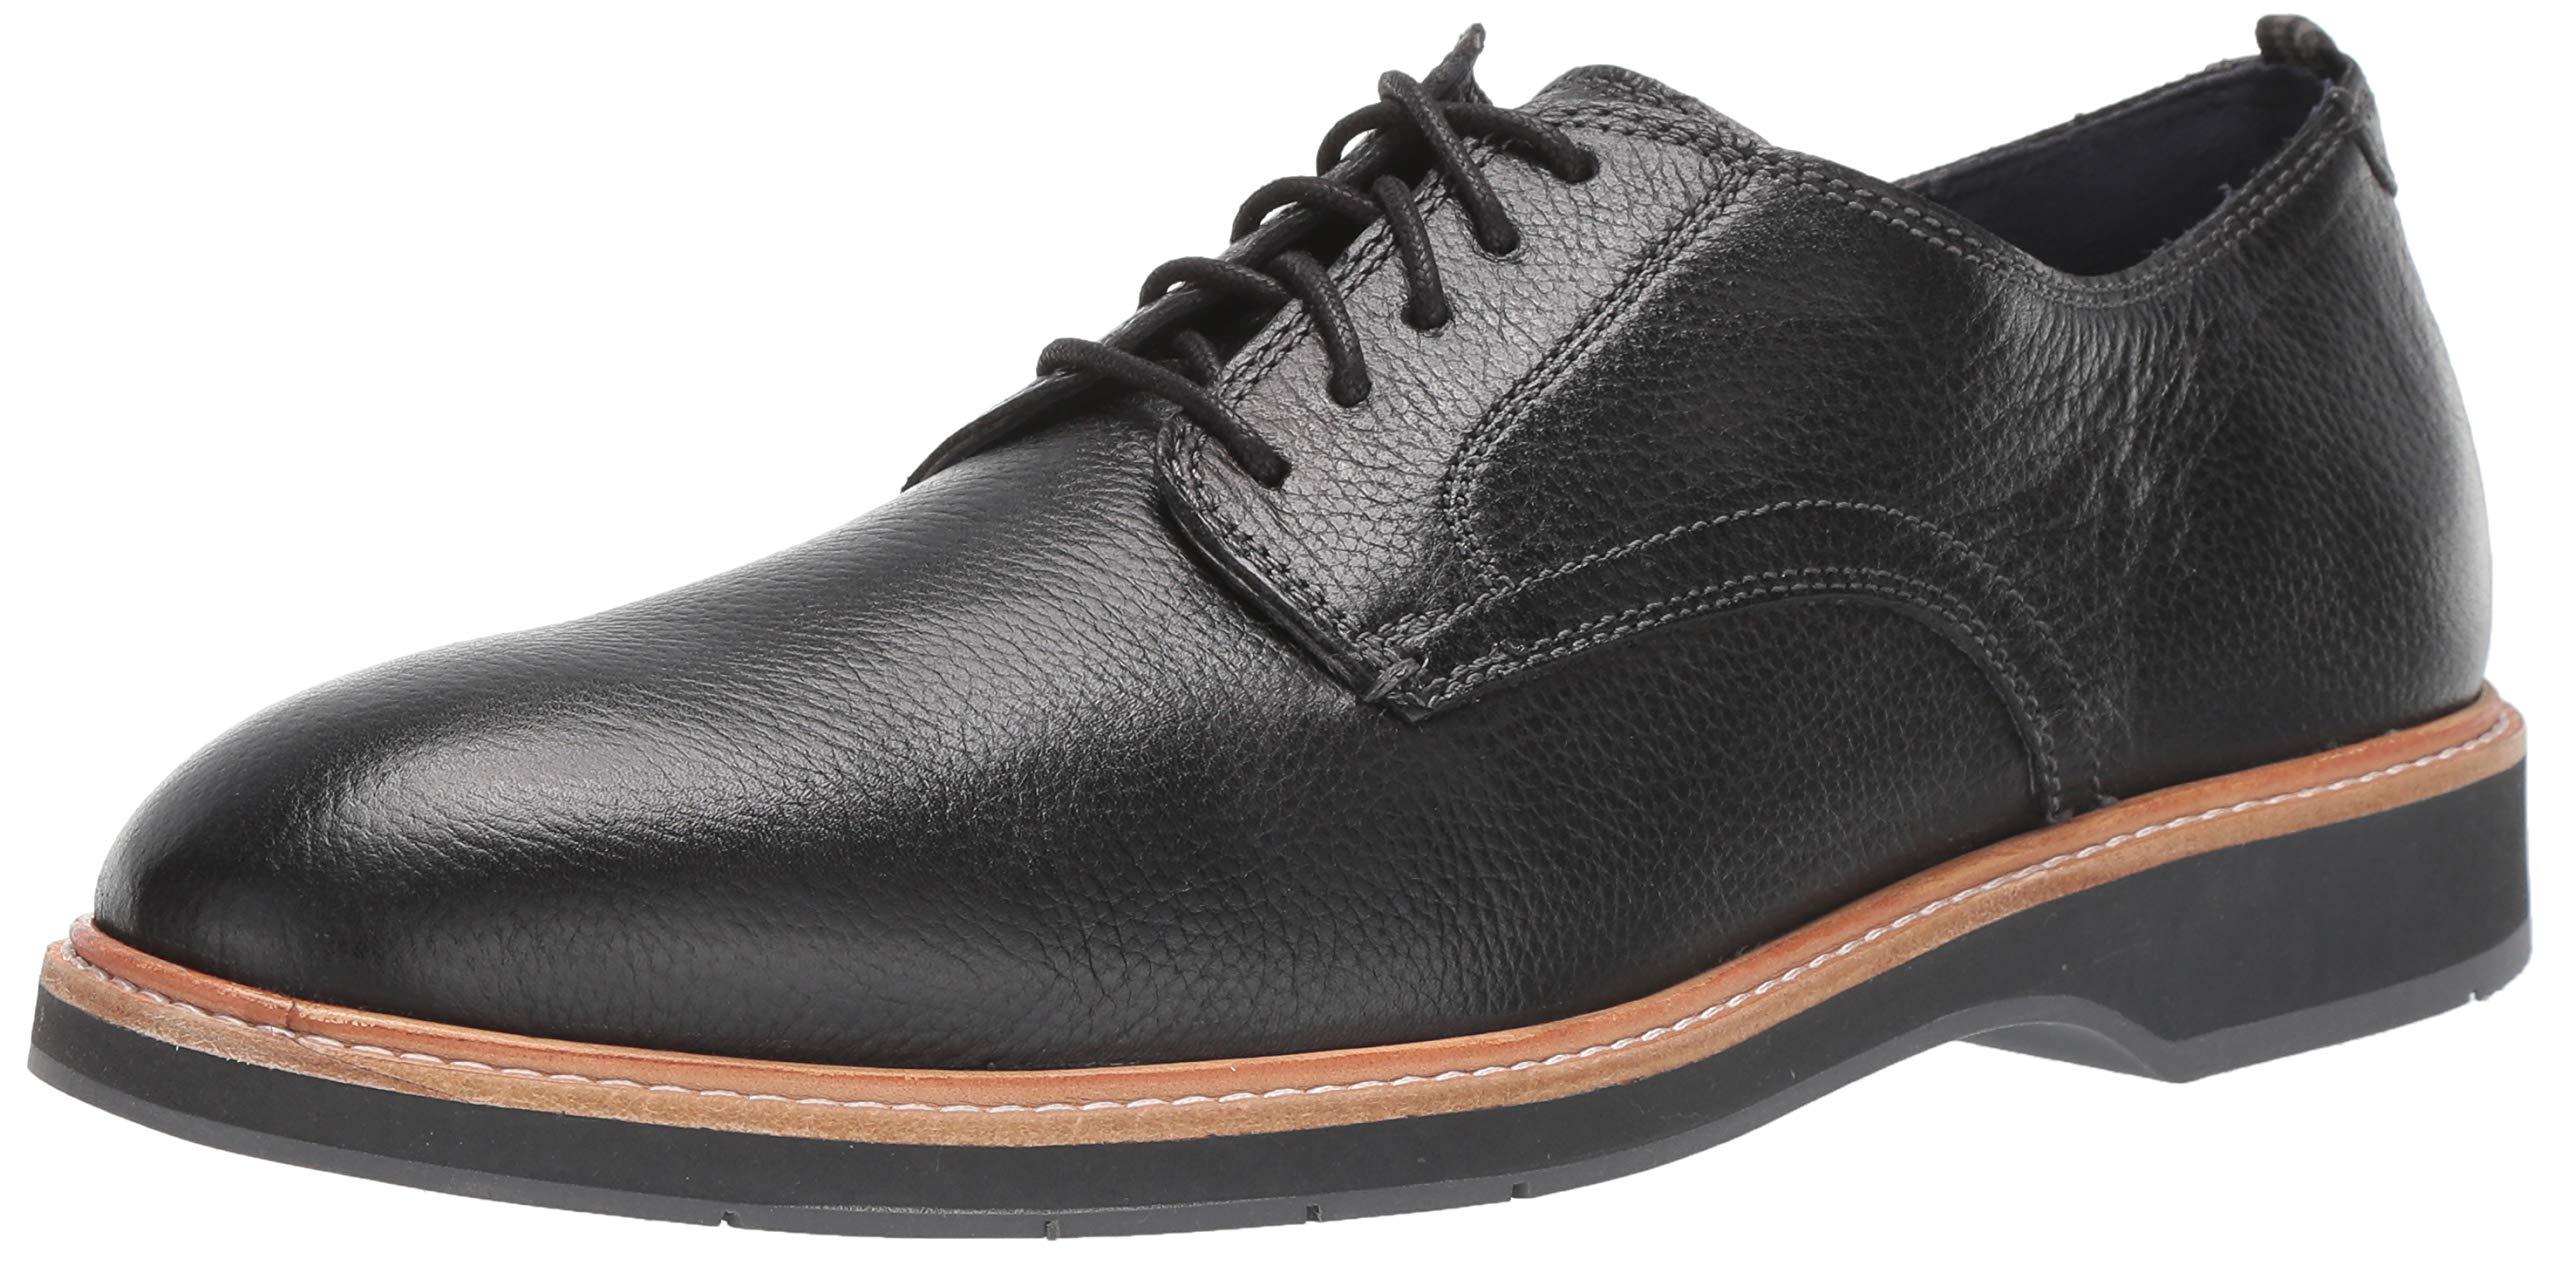 Cole Haan Leather Morris Plain Oxford in Black for Men - Save 78% - Lyst